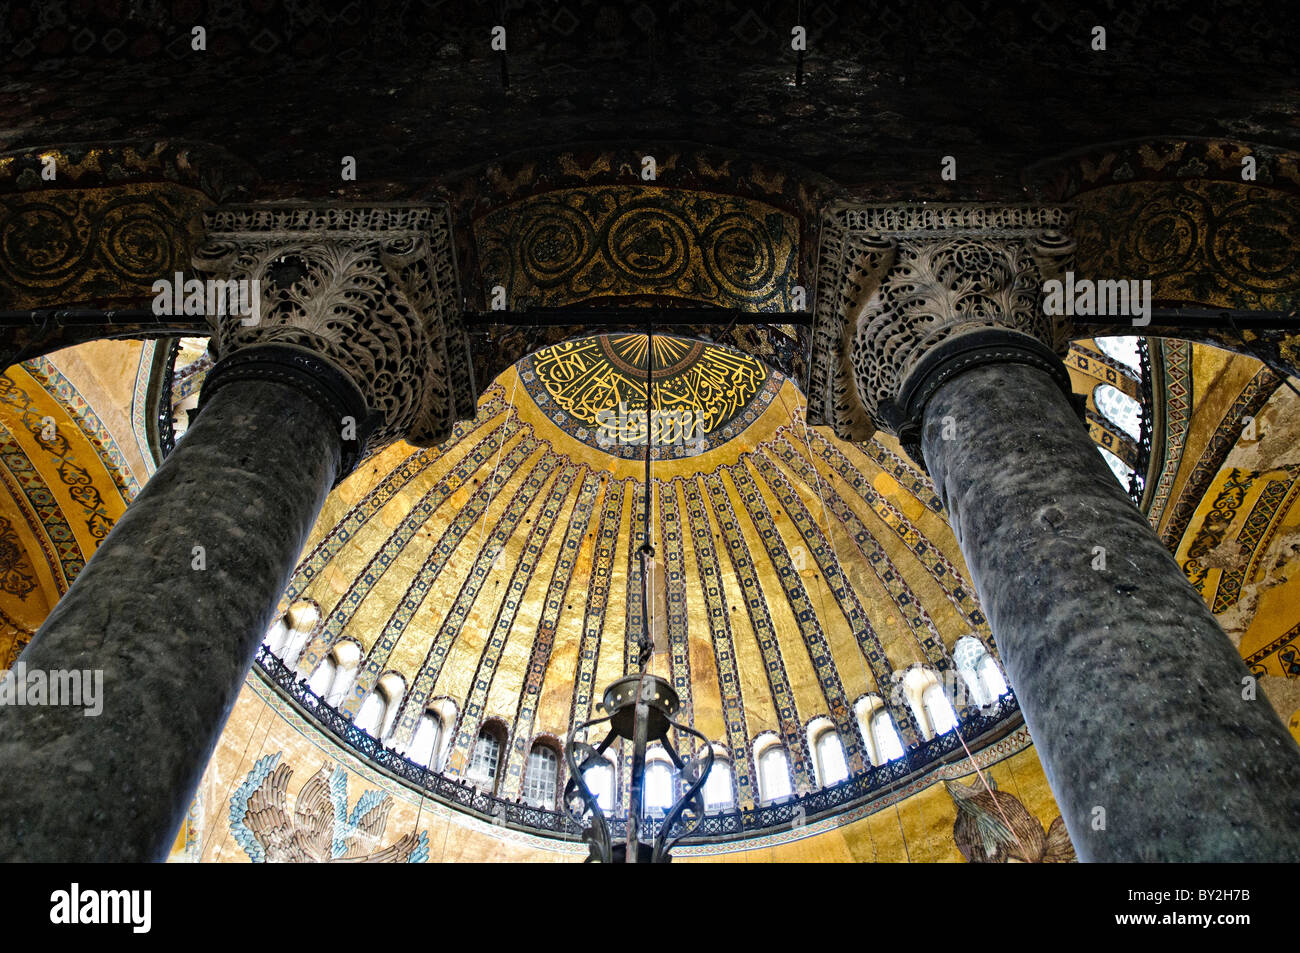 Originally built as a Christian cathedral, then converted to a Muslim mosque in the 15th century, and now a museum (since 1935), the Hagia Sophia is one of the oldest and grandest buildings in Istanbul. For a thousand years, it was the largest cathedral in the world and is regarded as the crowning achievement of Byzantine architecture. Stock Photo